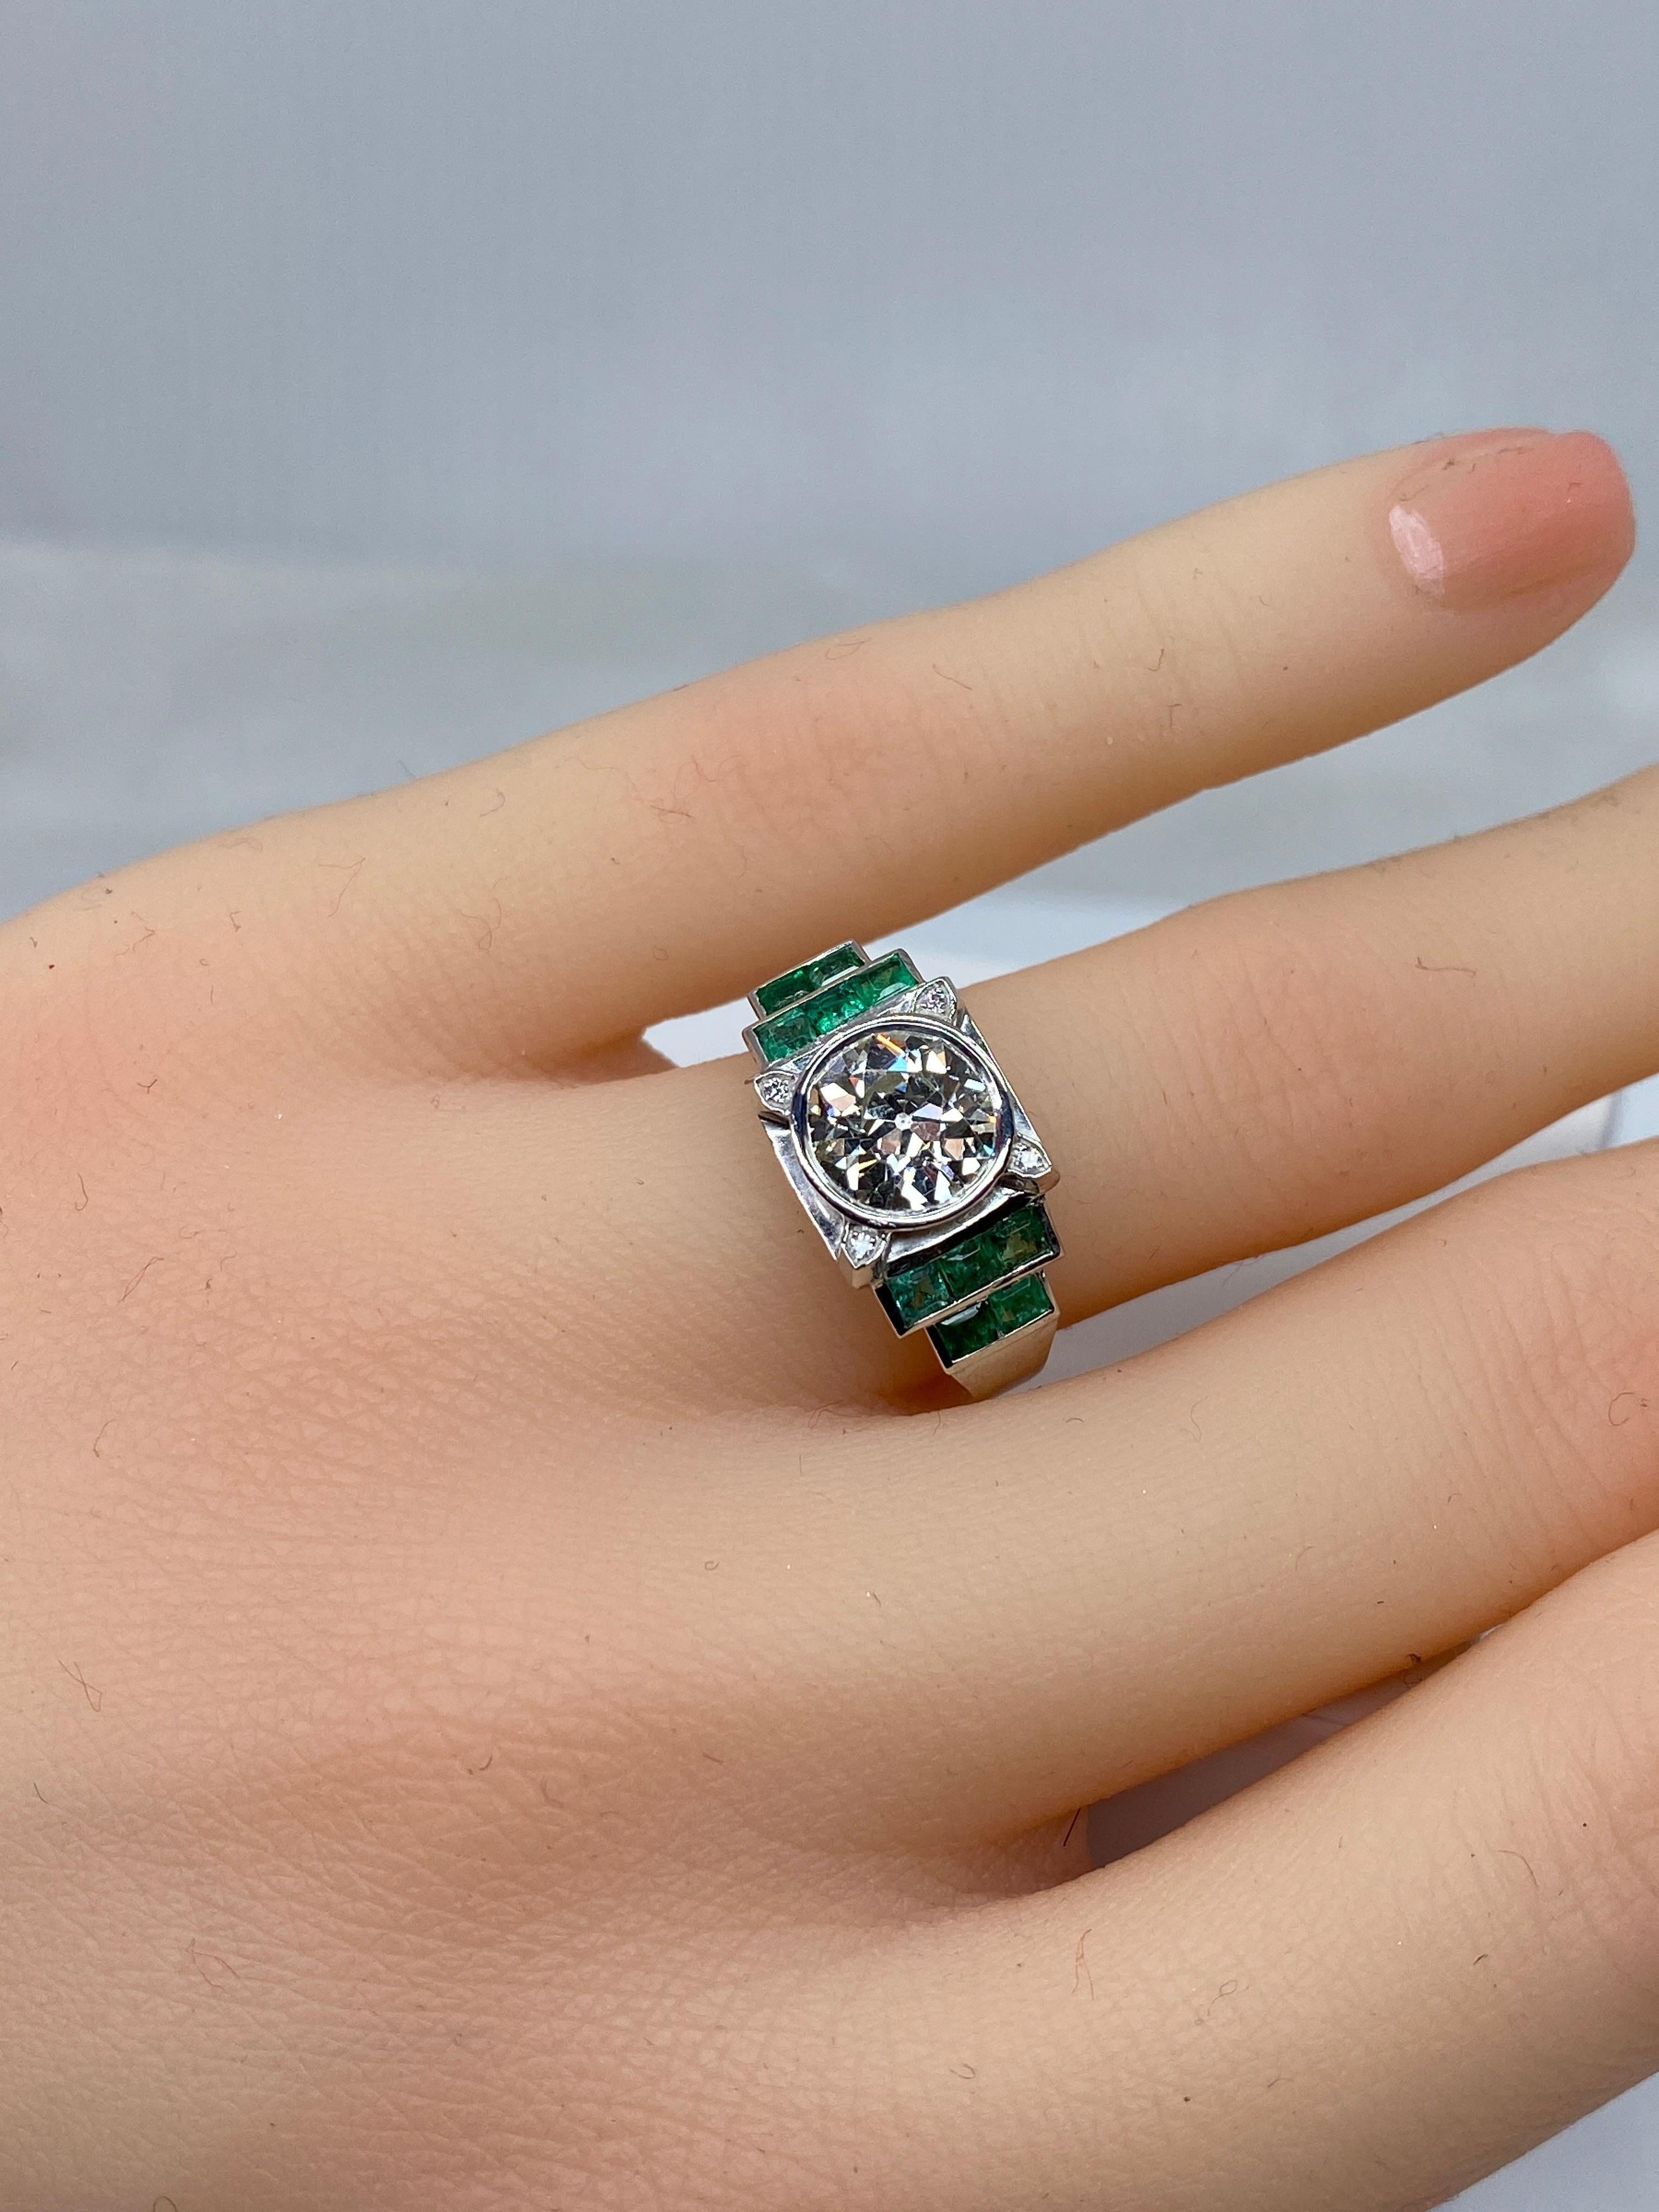 Women's or Men's Platinium Engagement Ring Set with a 1.55 Carat Diamond Backed by Emeralds, 1900 For Sale